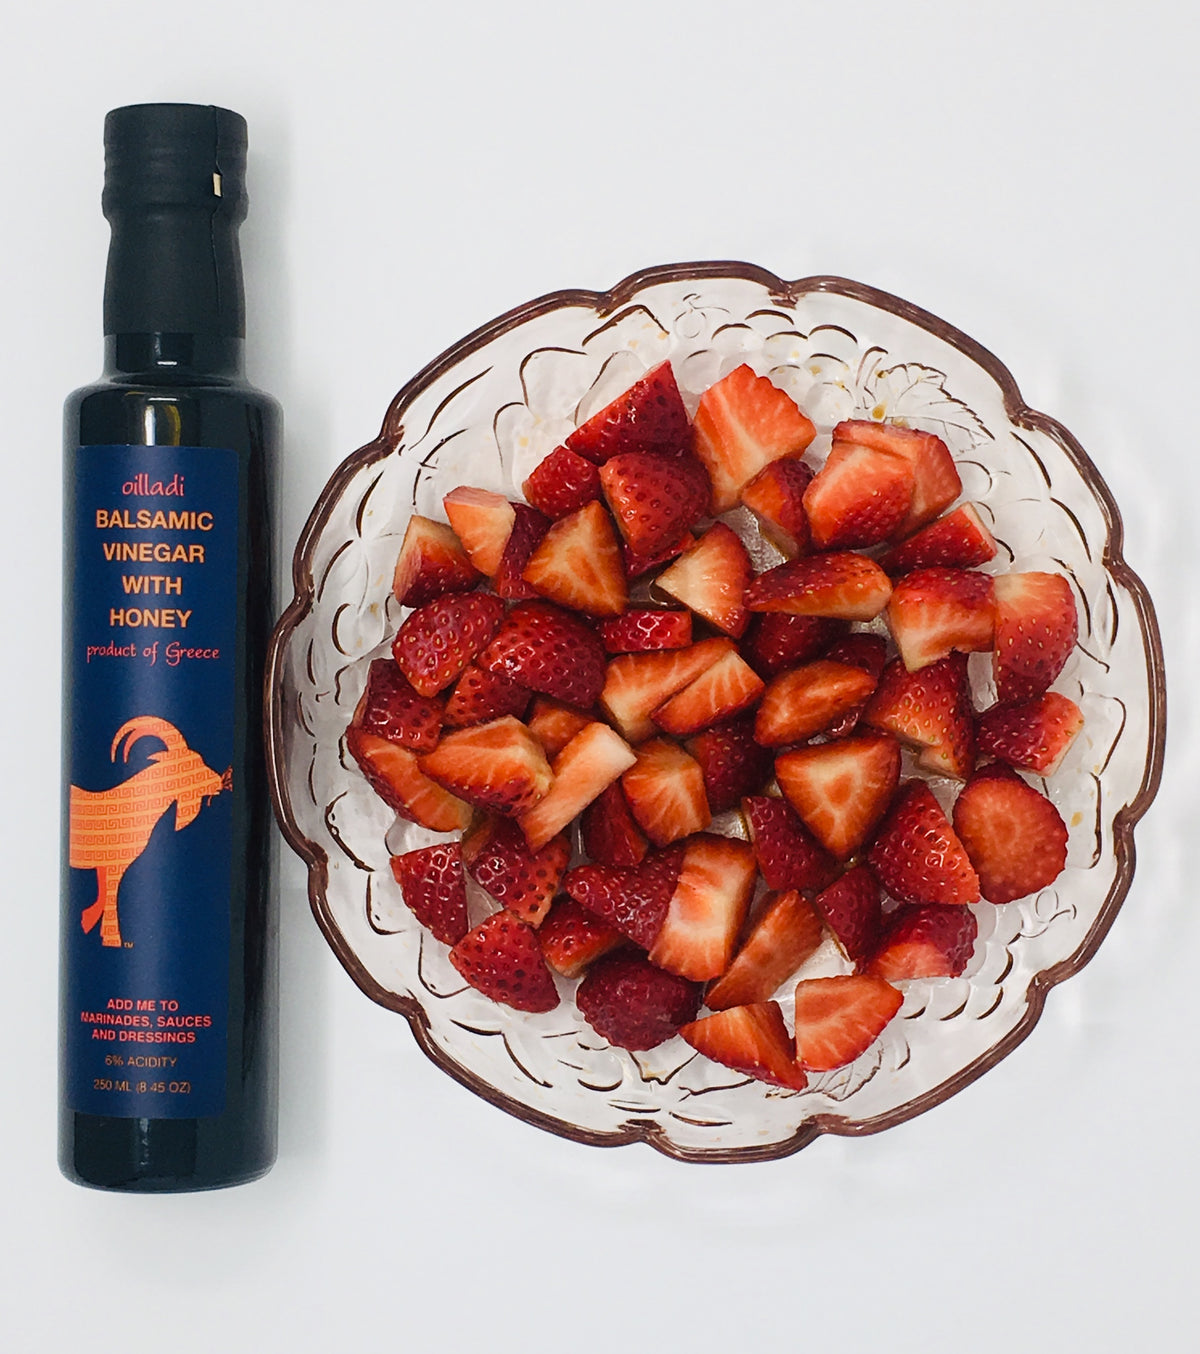 Bottle of Oilladi balsamic vinegar with honey and a plate of strawberries